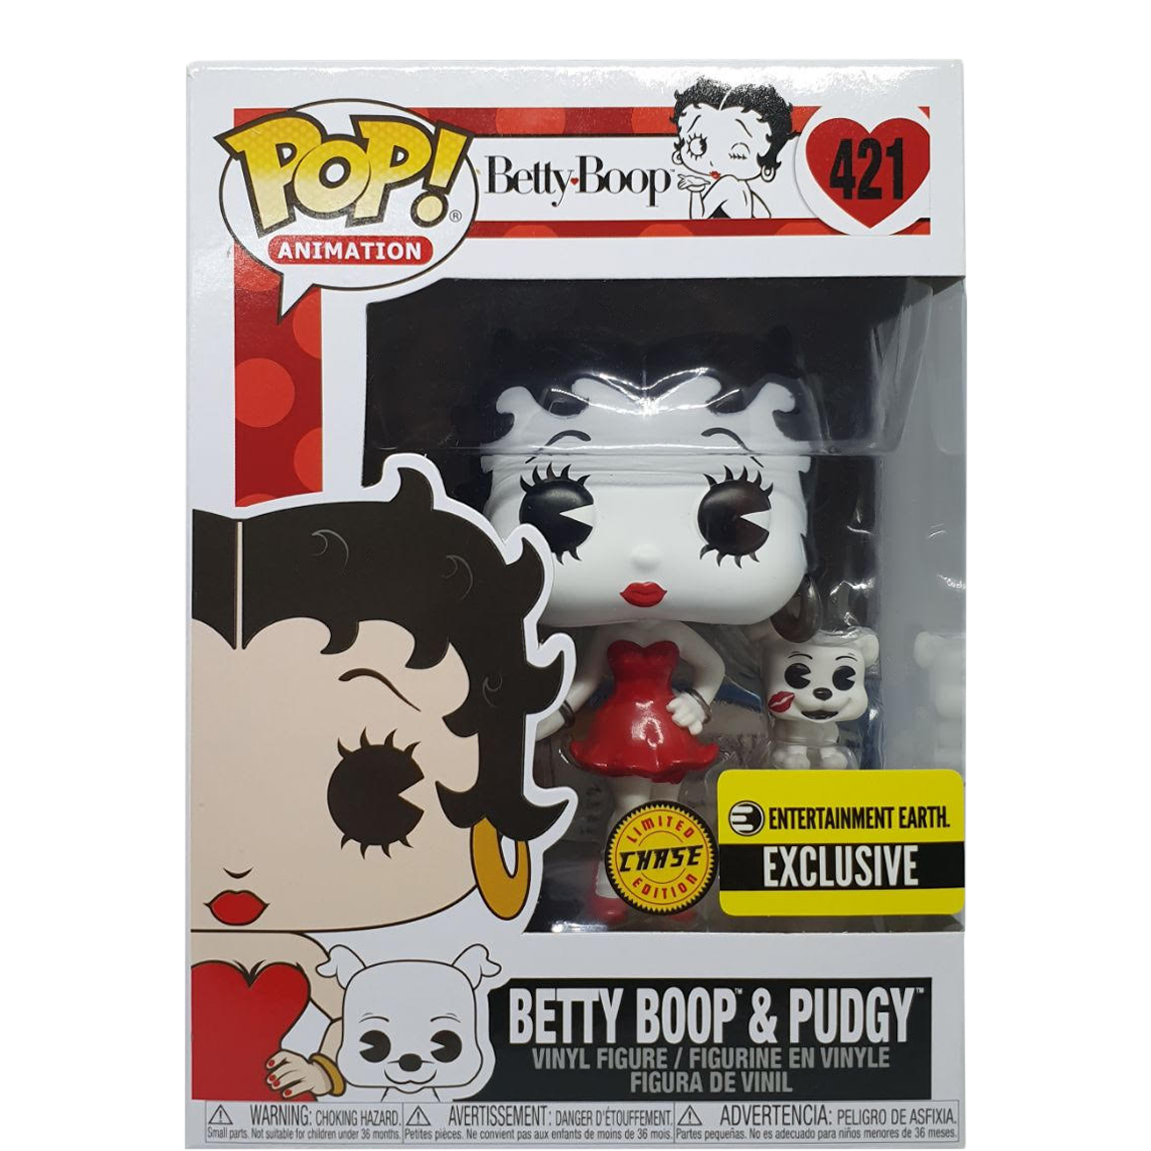 Funko Pop! Animation Betty Boop Betty Boop & Pudgy (Chase